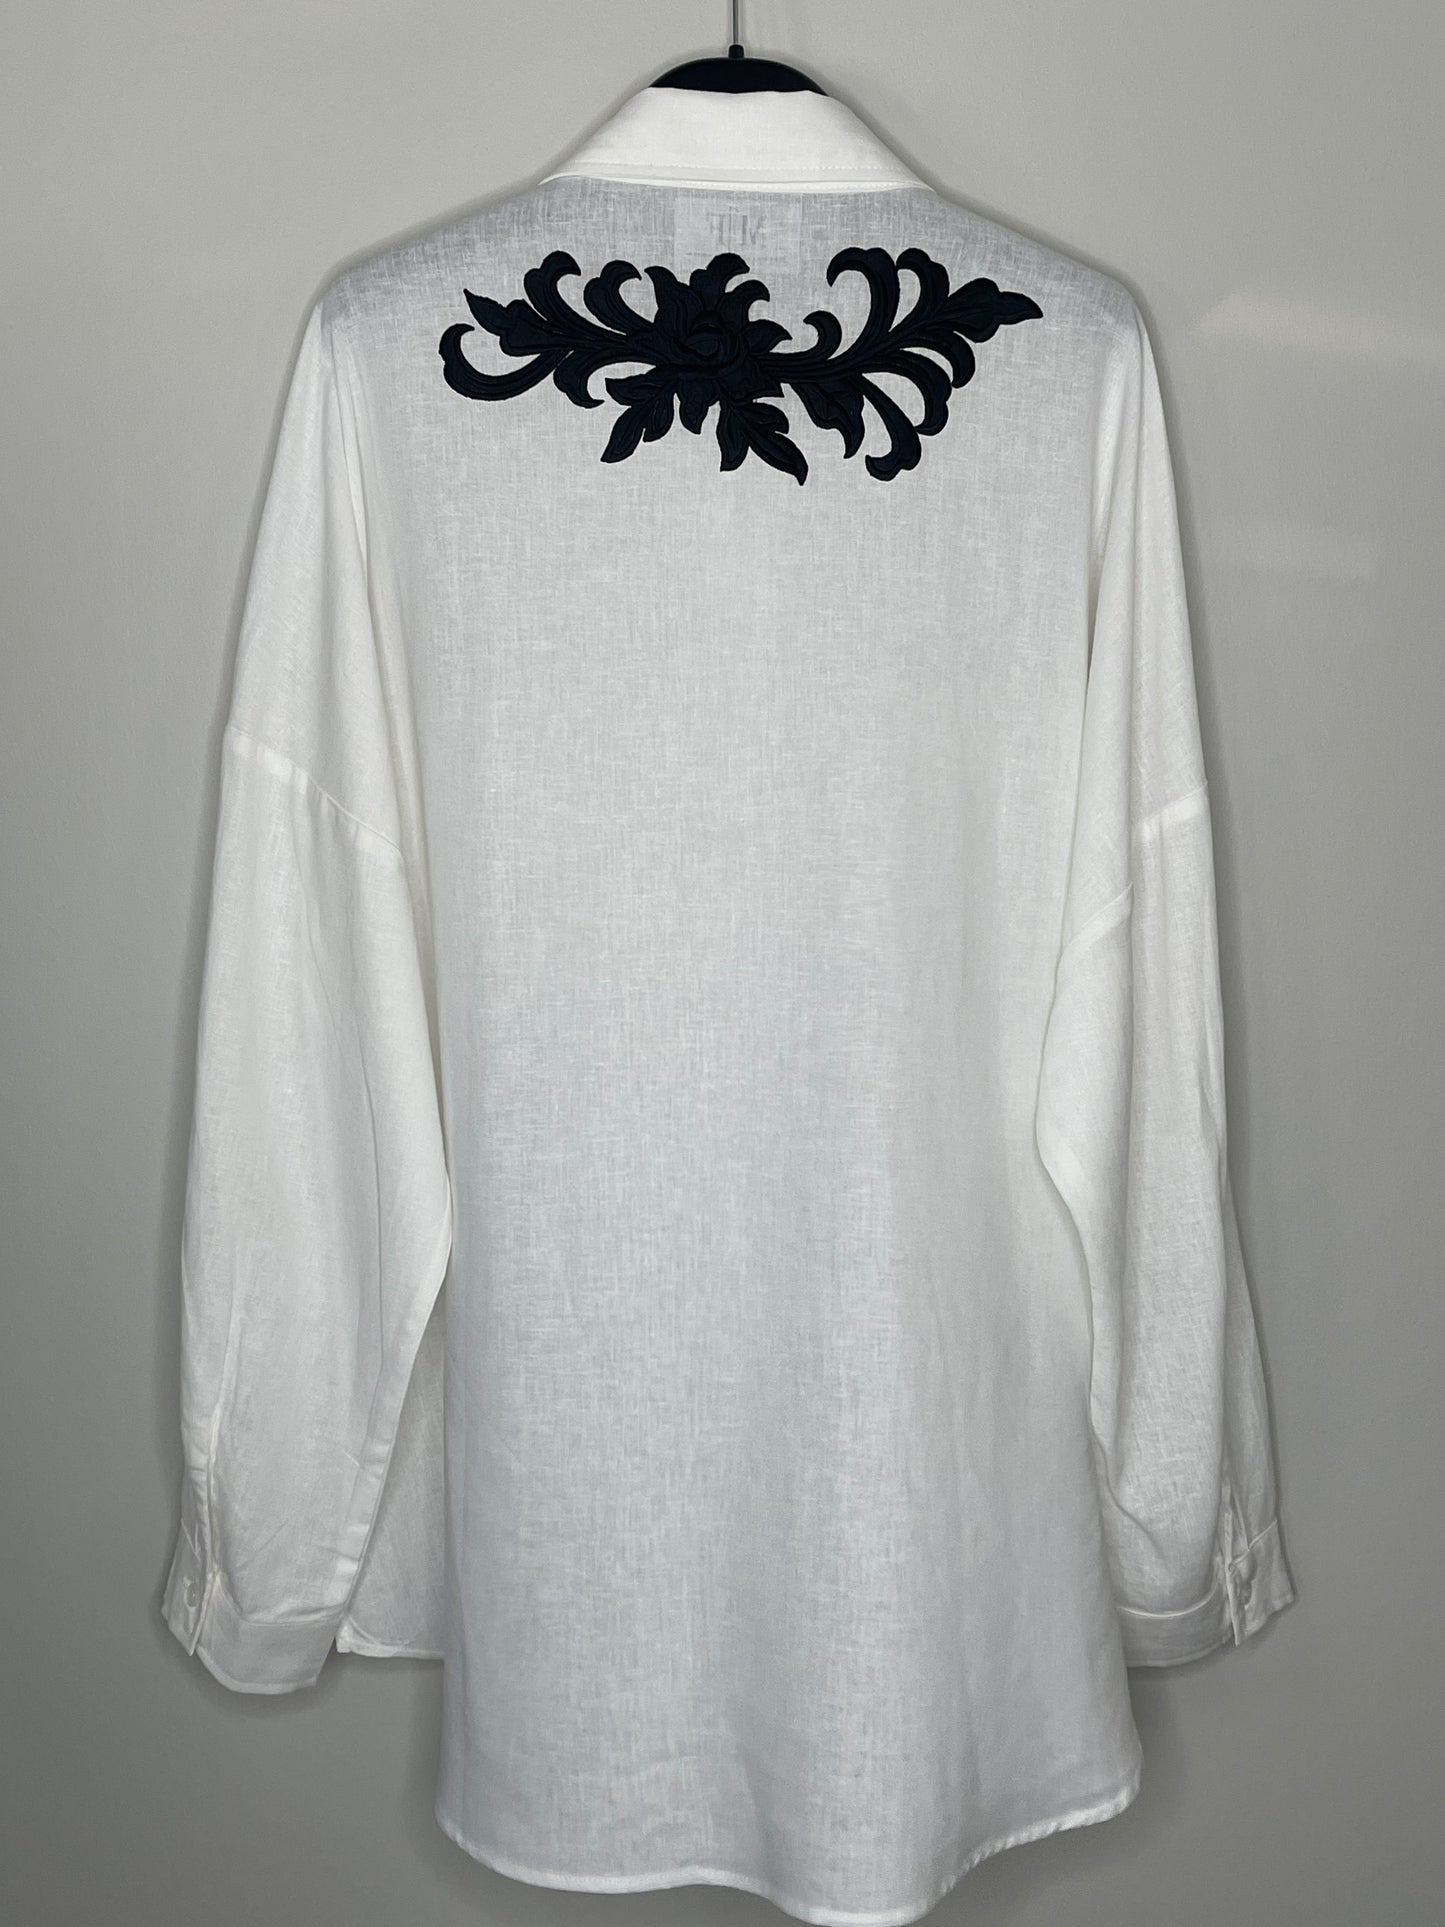 SMALL Black Embroidered Detail Linen Blouse